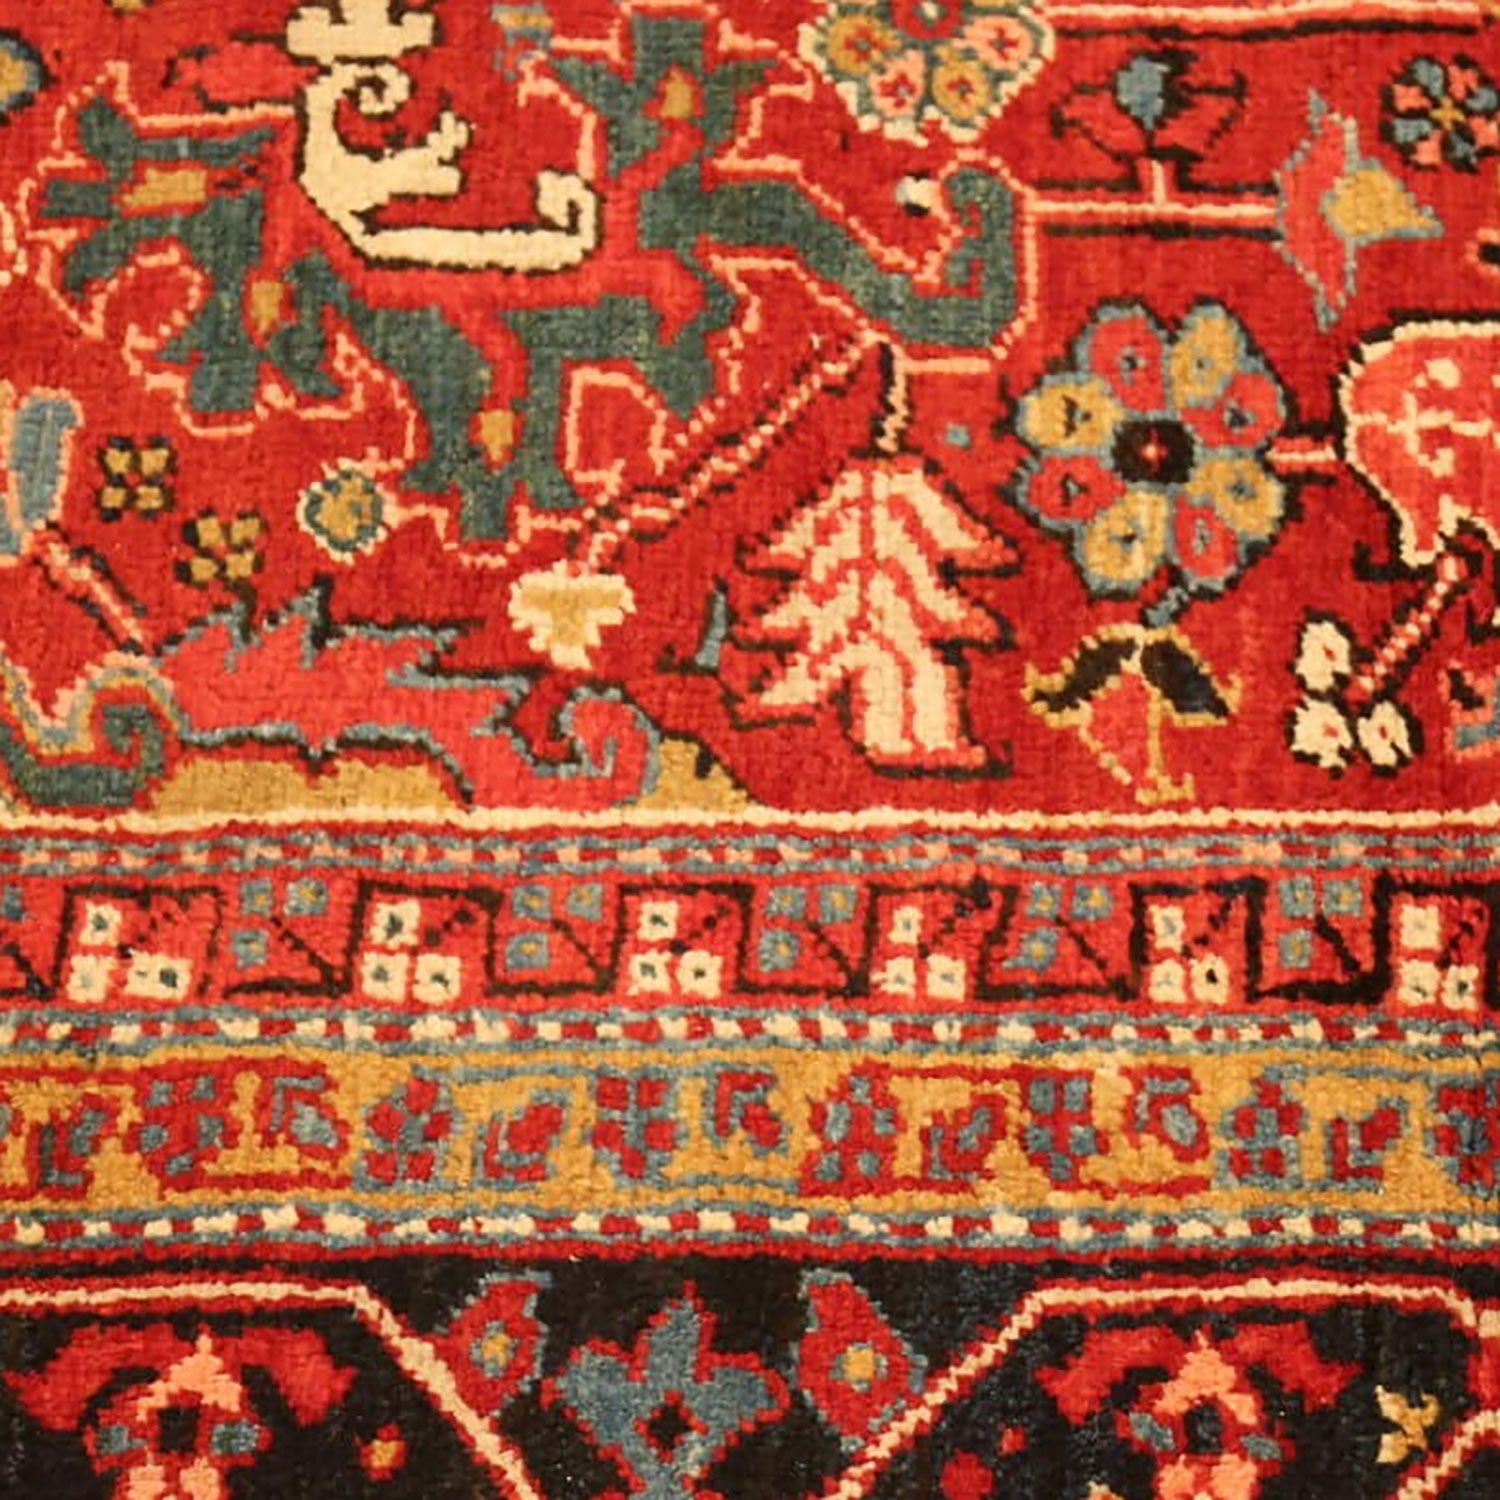 Exquisite handmade carpet showcases intricate design and vibrant color palette.